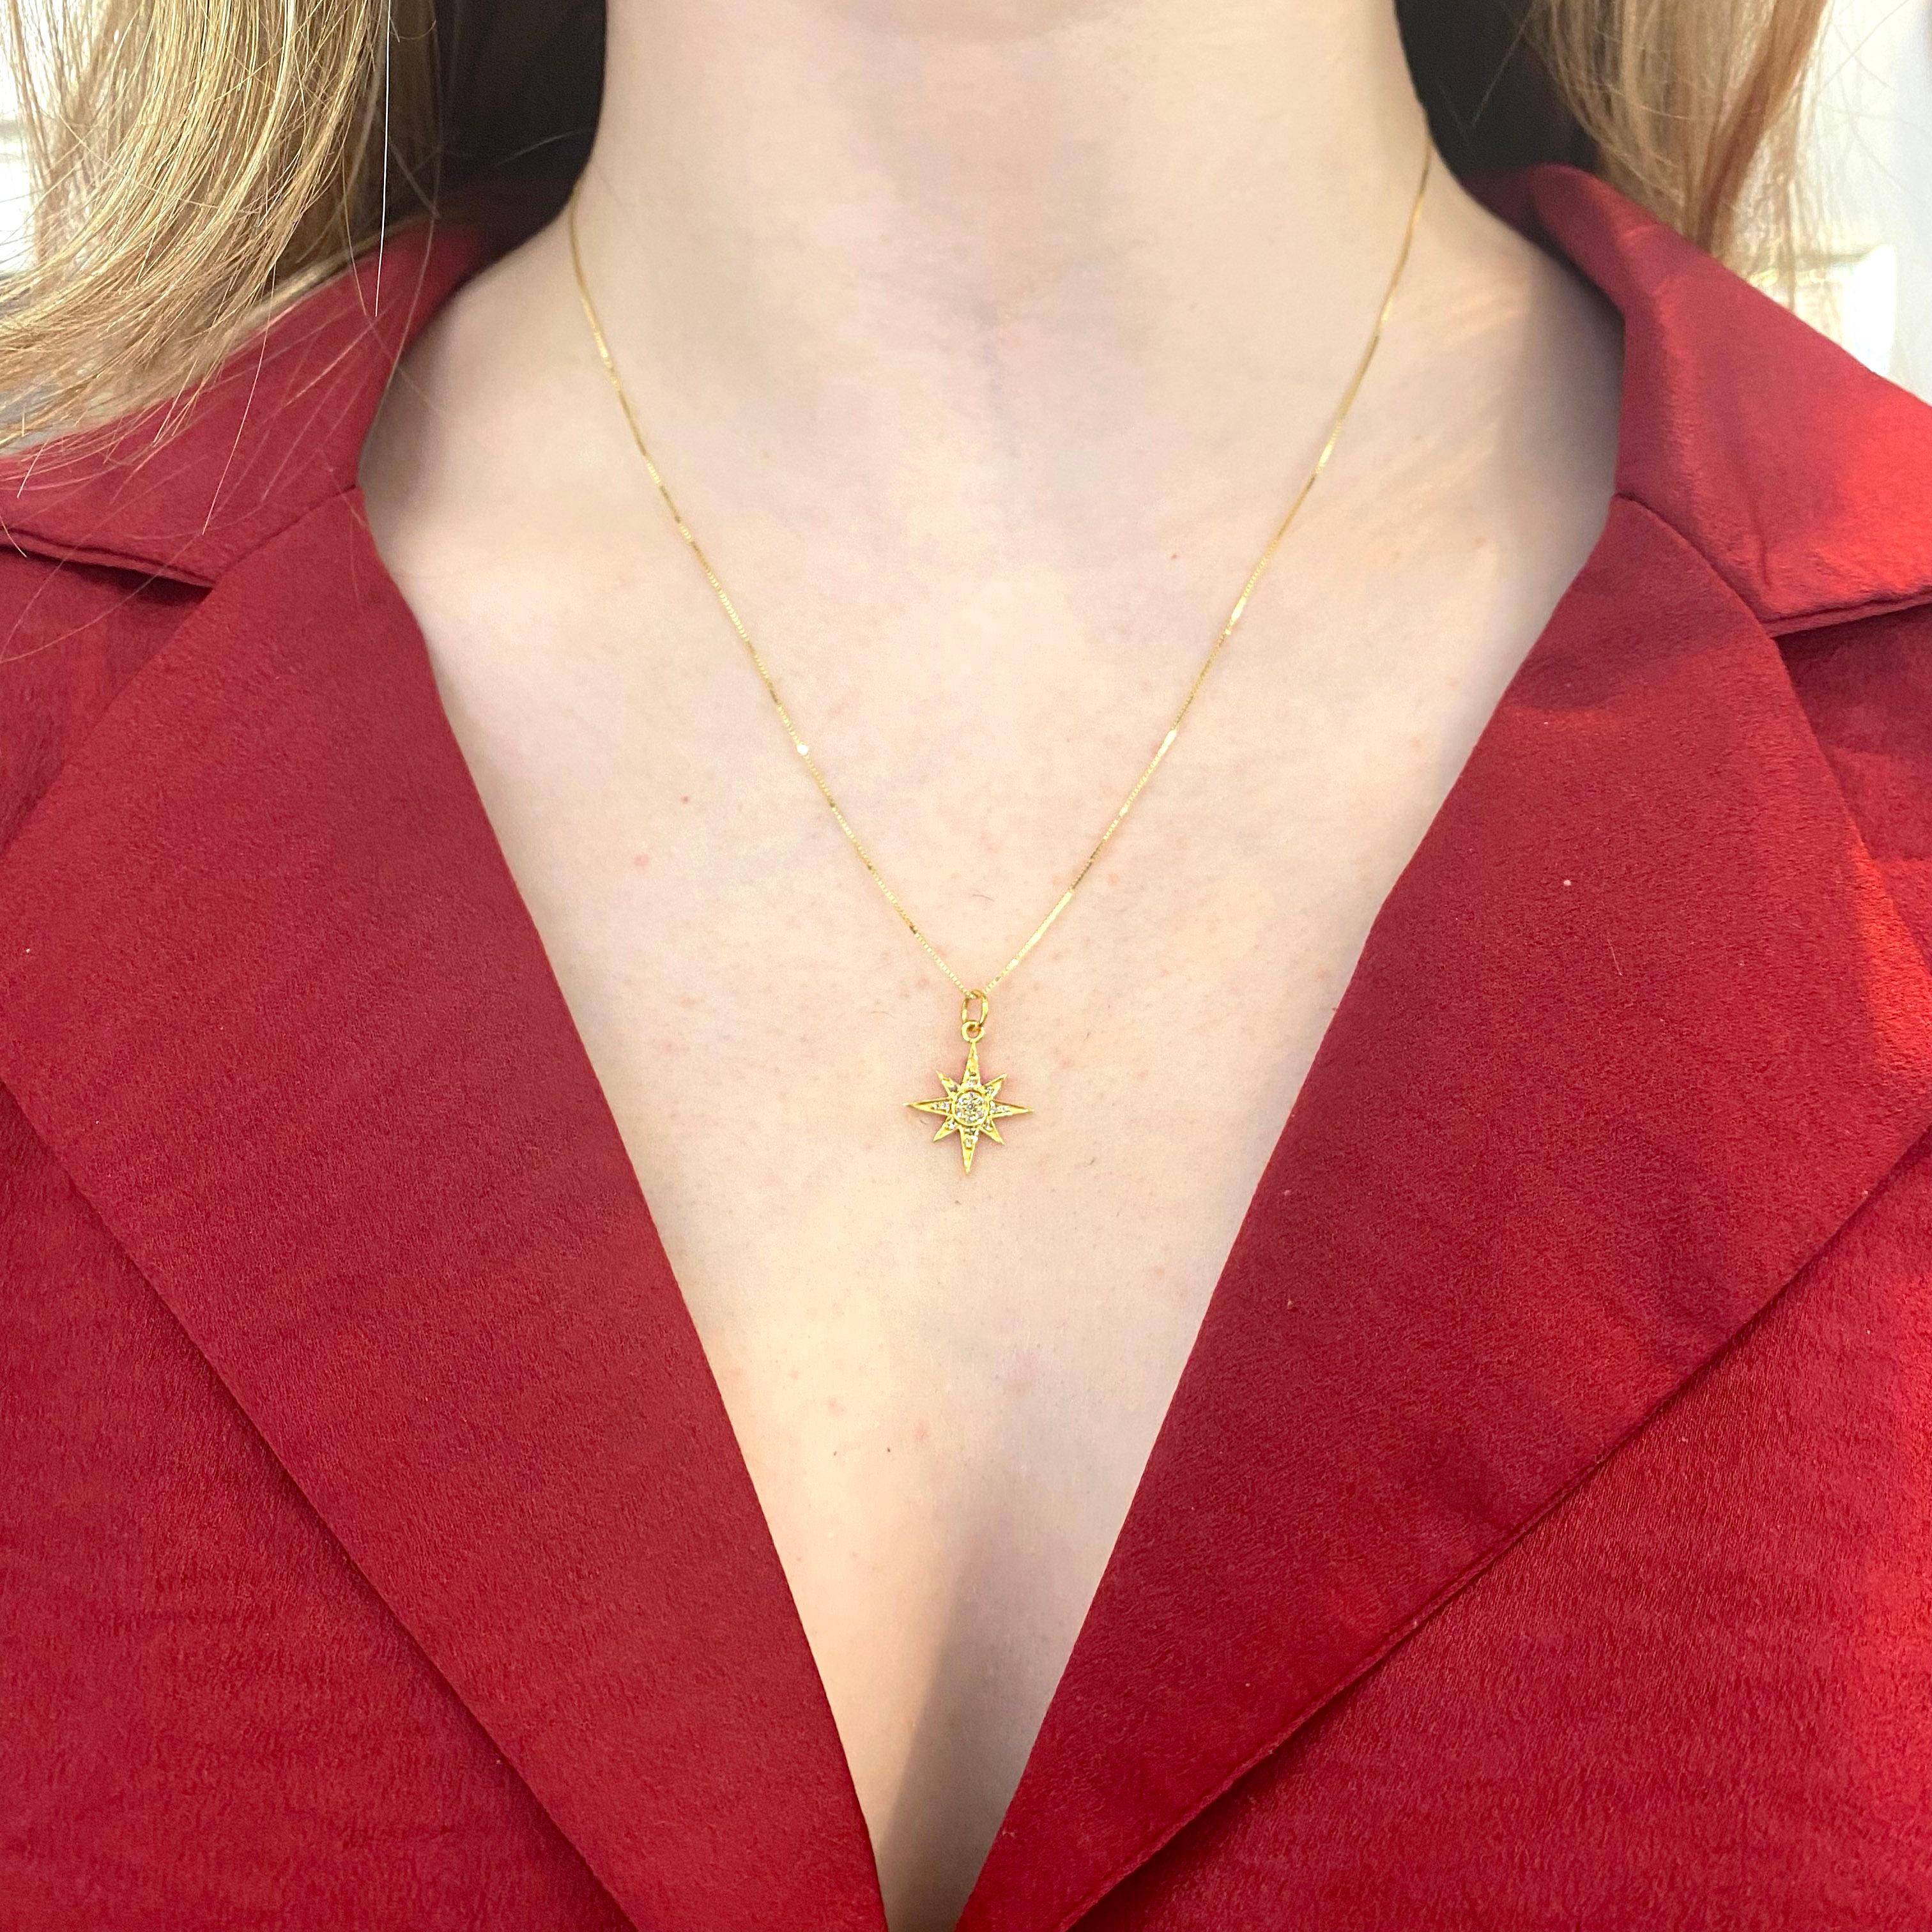 Know your direction by following the North Star! This diamond pendant will guide you and show you the way!  The pendant comes with the 14 karat yellow gold box chain! This is an amazing star pendant that will look good with other pendants or just